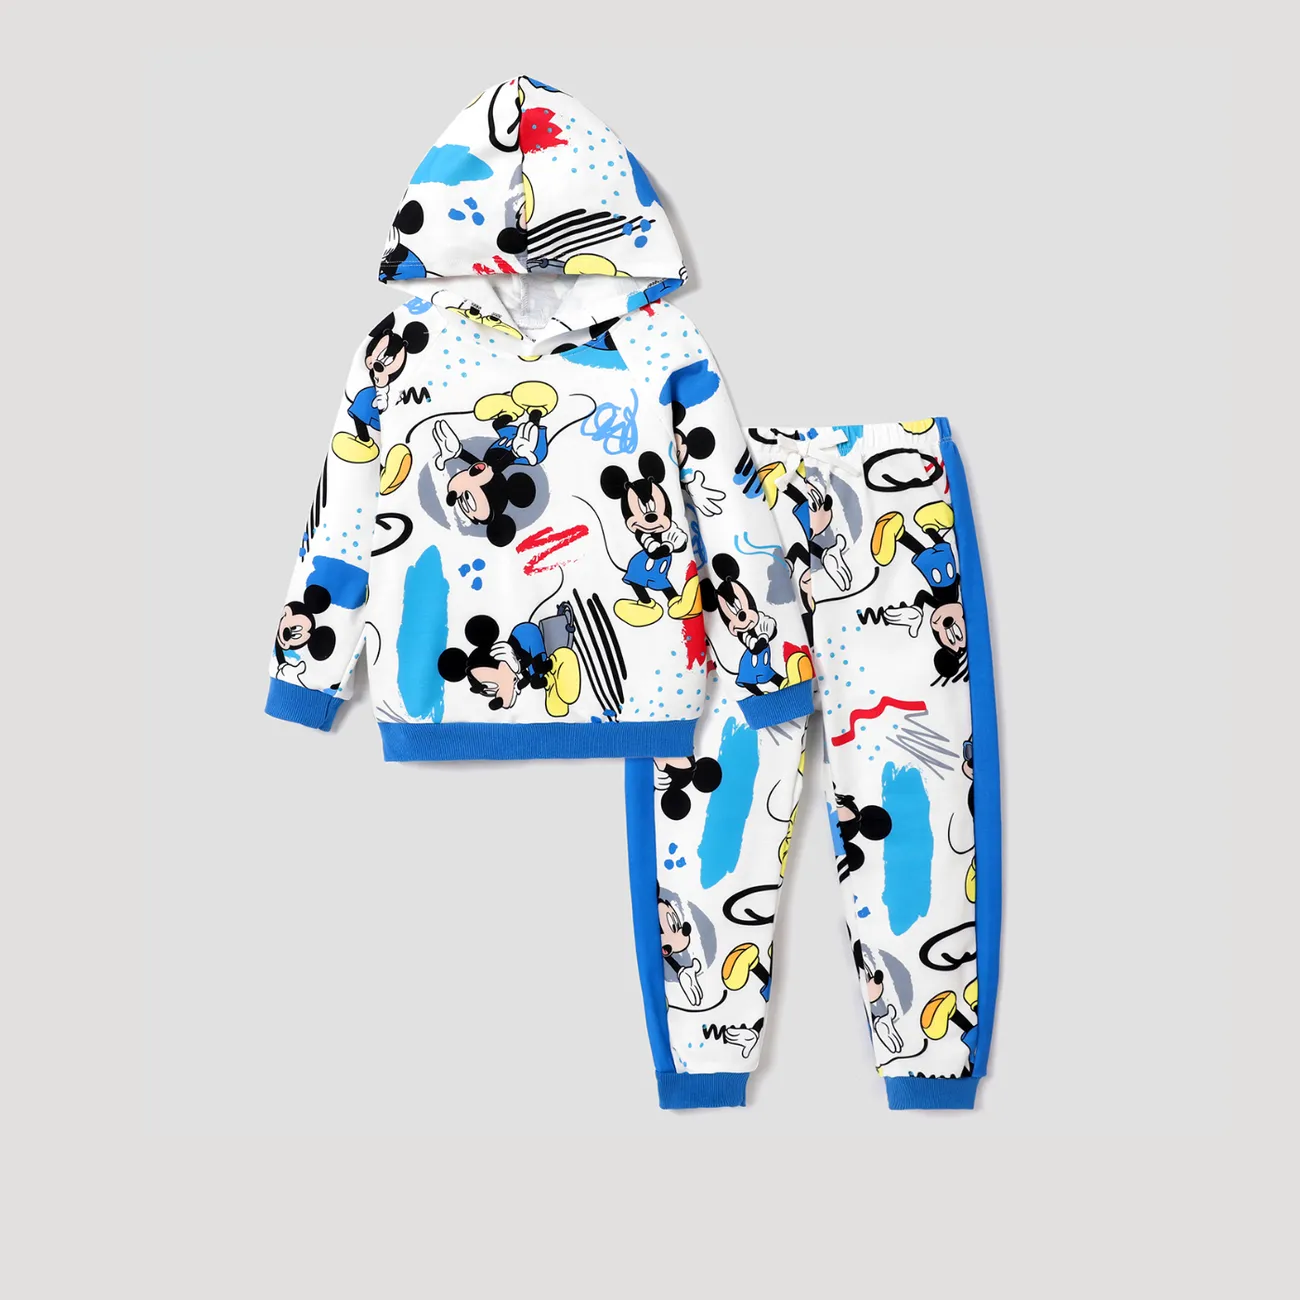 Disney Mickey and Friends Toddler Boy Character Print Long-sleeve Hooded Top and Pants Set White big image 1